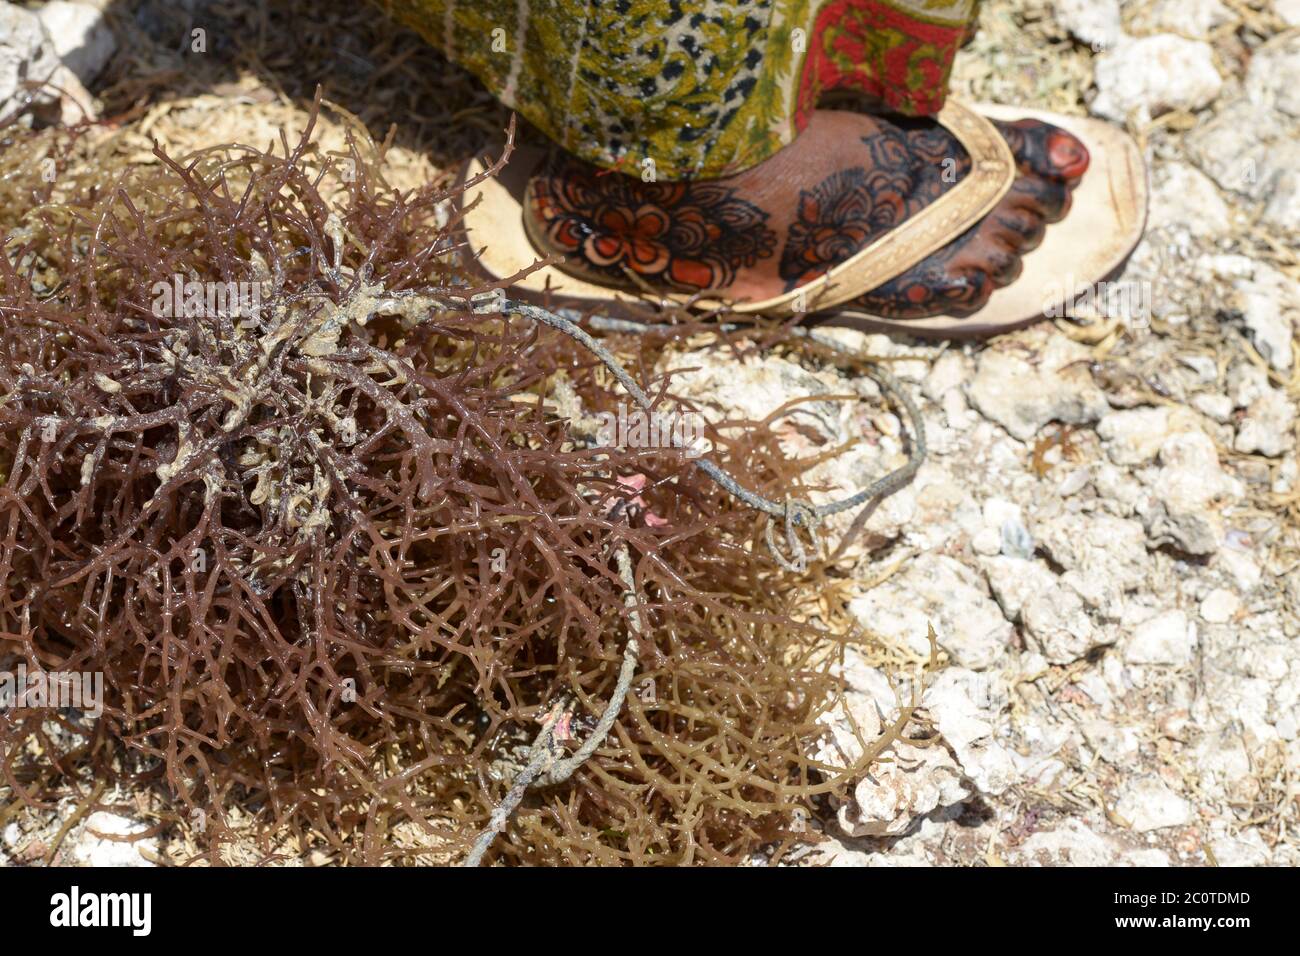 TANZANIA, Zanzibar, due to climate change and rising water temperatures seaweed farmer have shifted to plant red algae farming in deep water, drying algae in sun, woman foot with henna painting Stock Photo